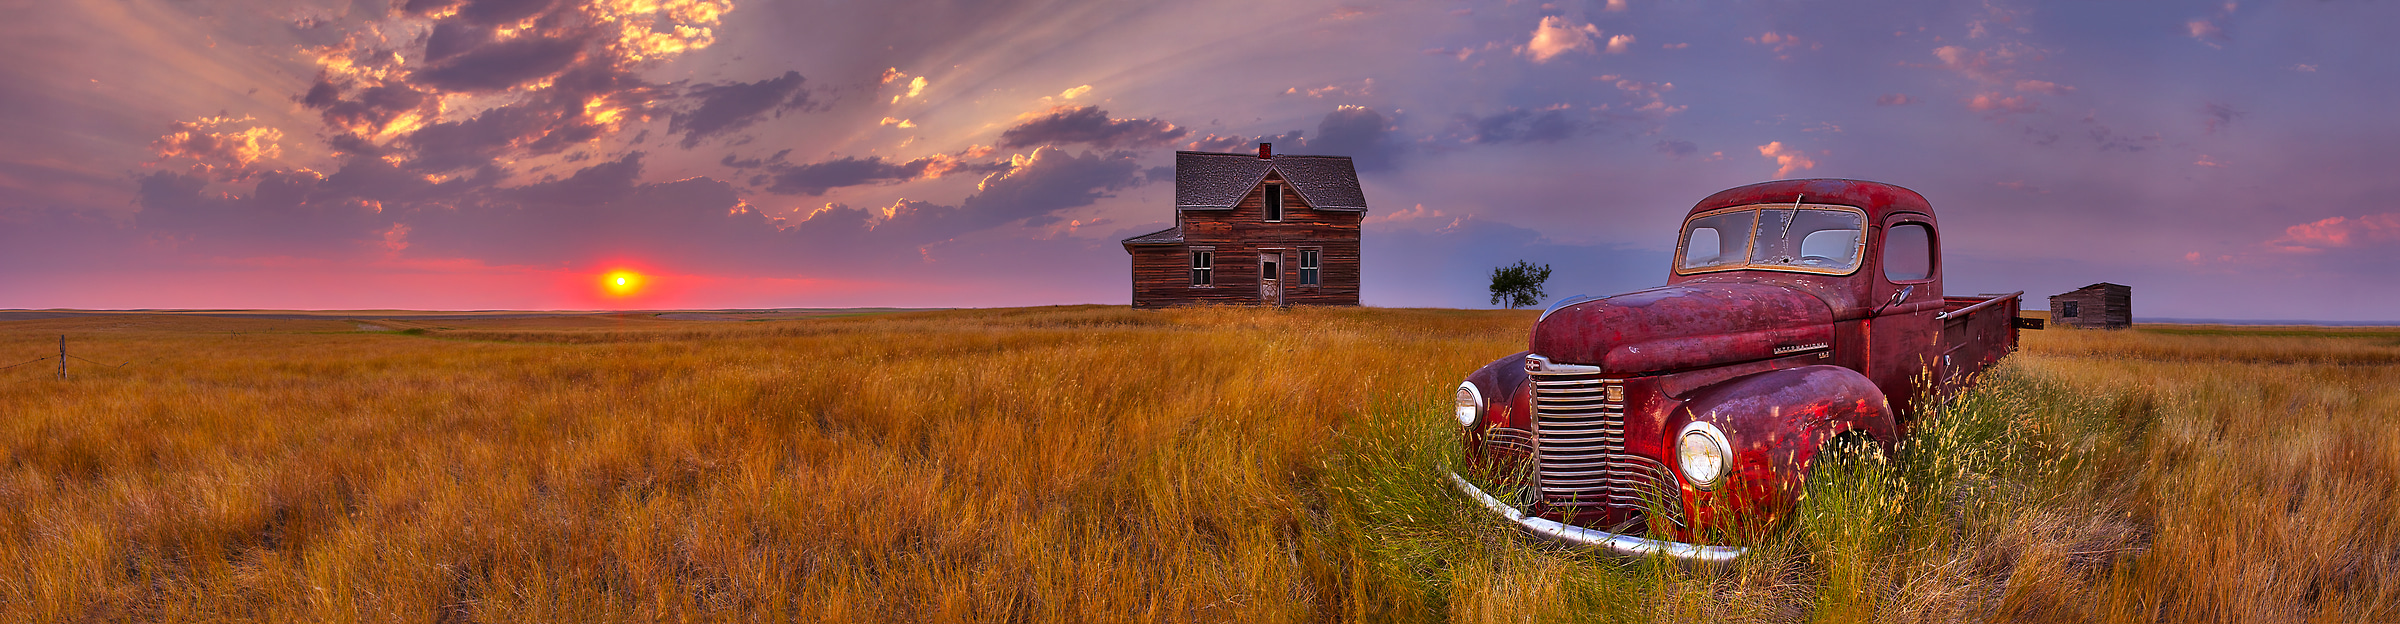 105 megapixels! A very high resolution, large-format VAST photo of farmland, the prairie, an old truck, and an abandoned house; fine art landscape photo created at sunset by Scott Dimond on the Great Plains in Saskatchewan, Canada